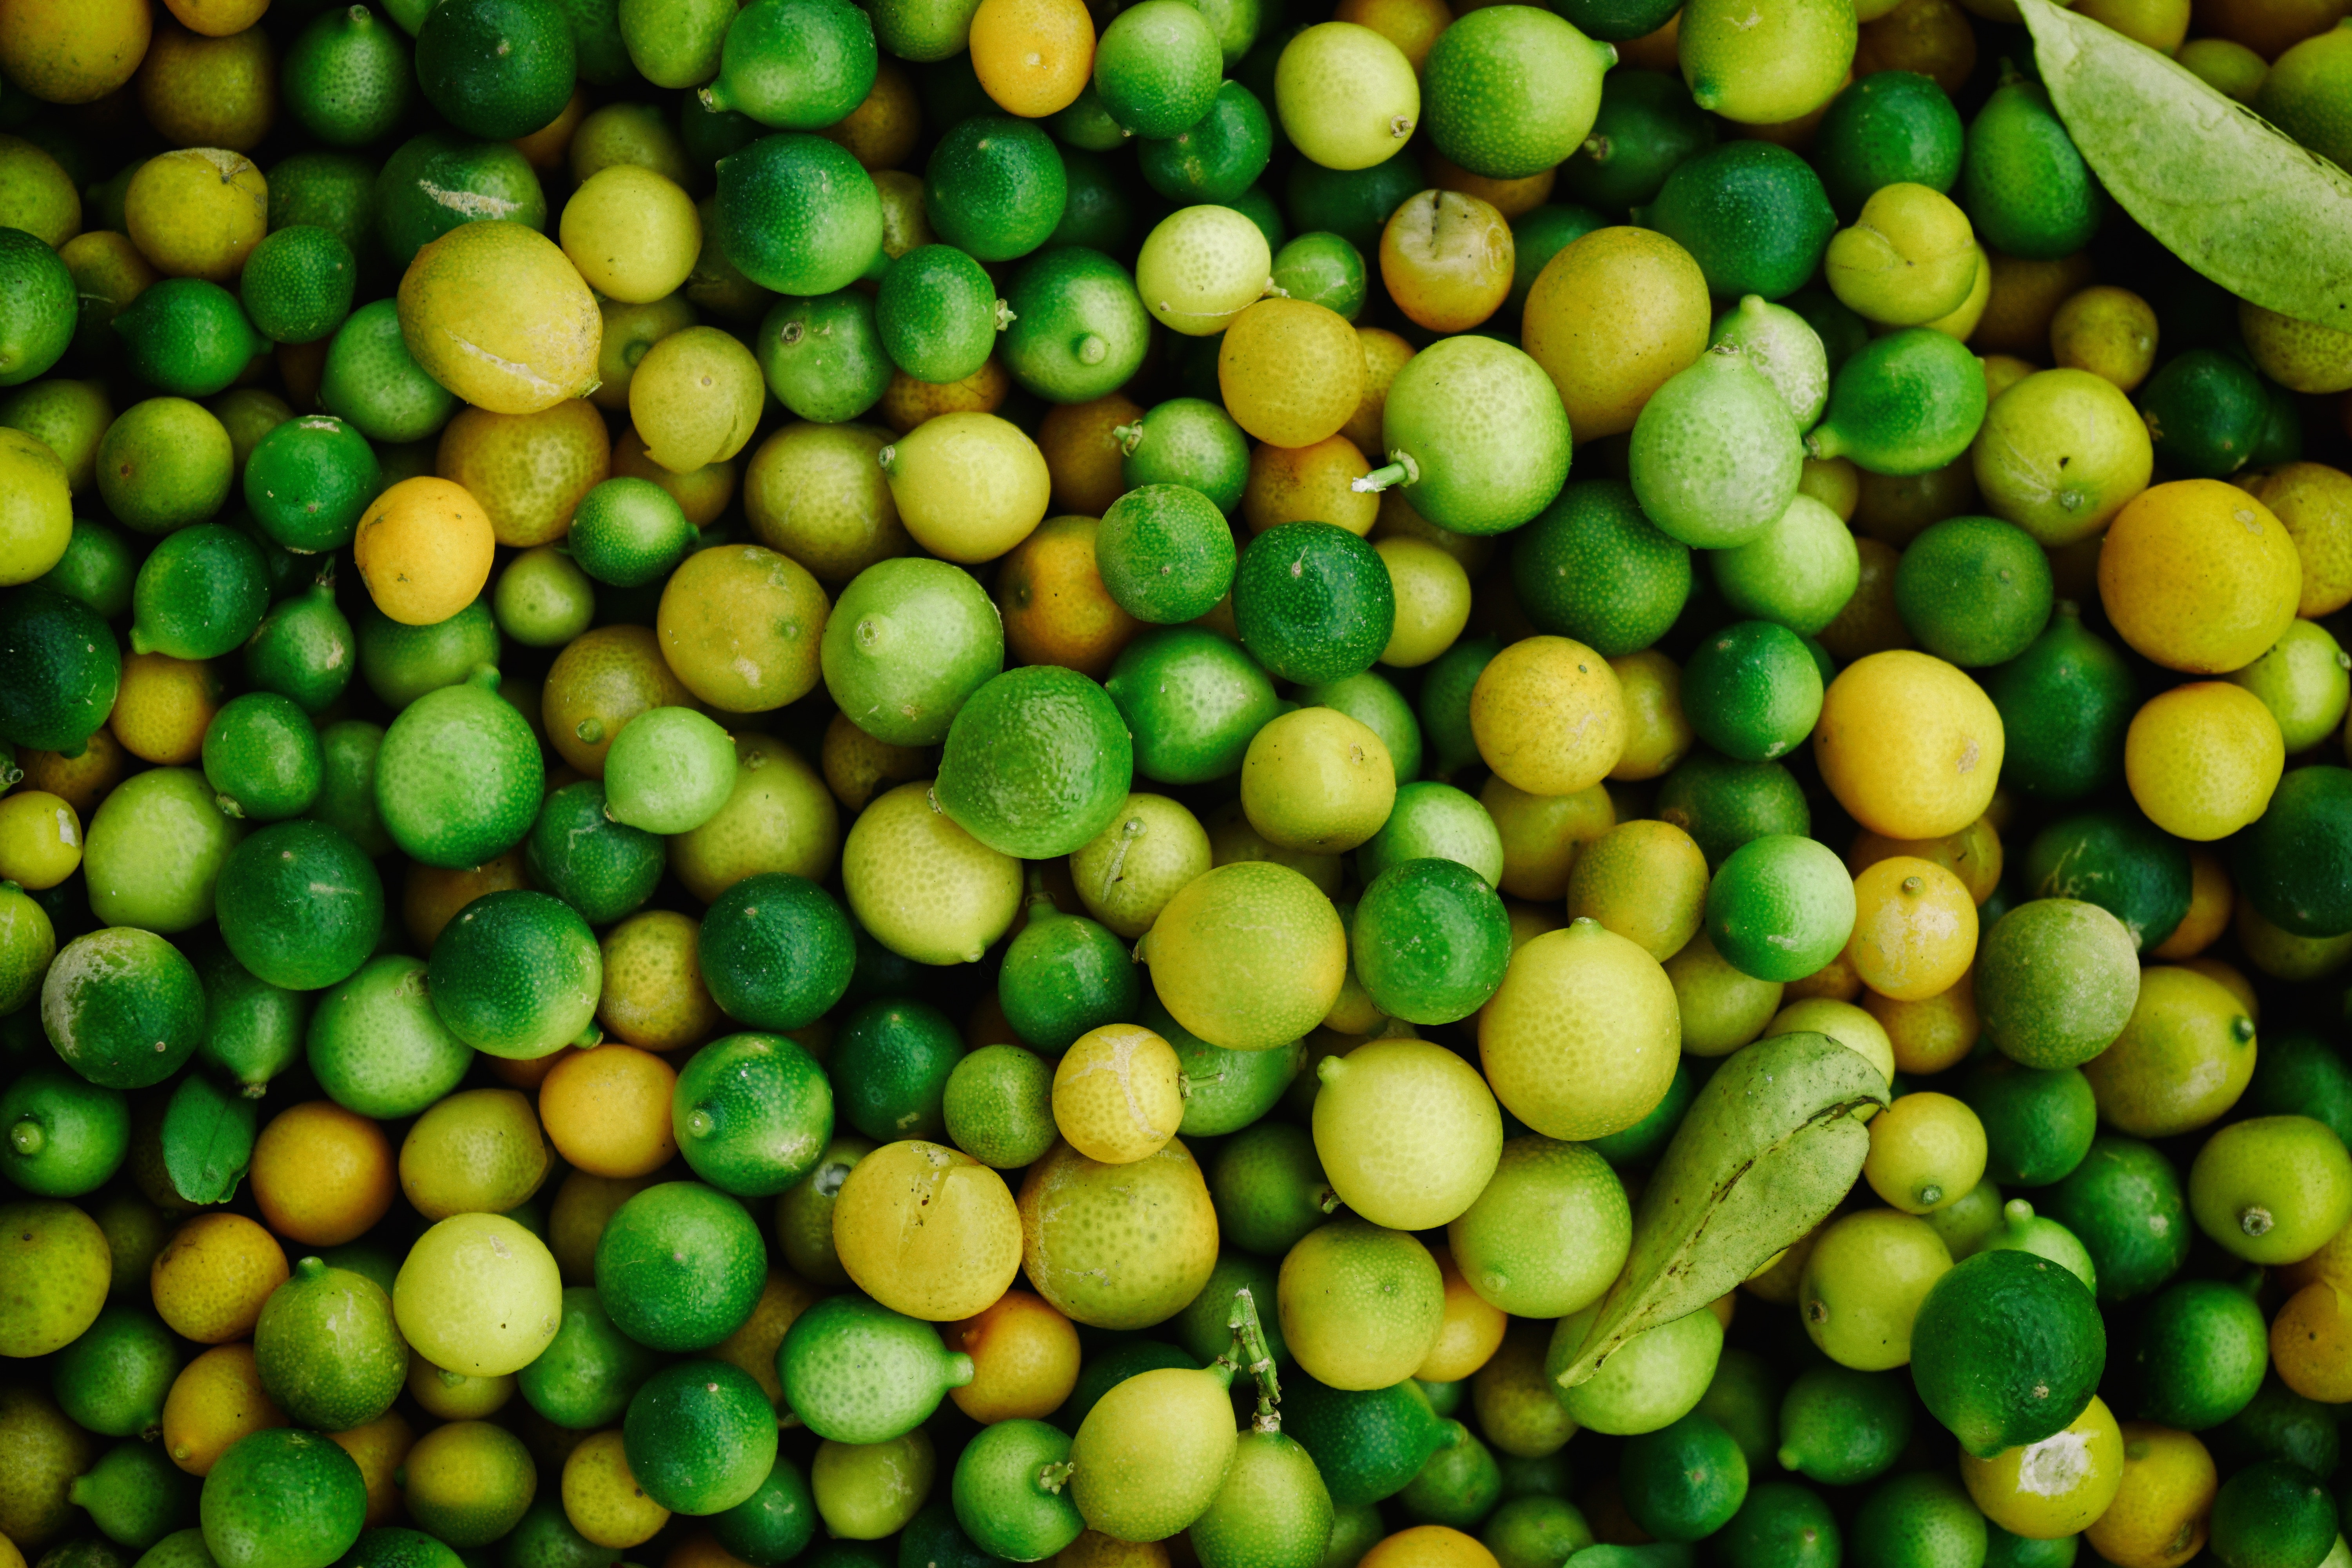 green and yellow round fruit lot